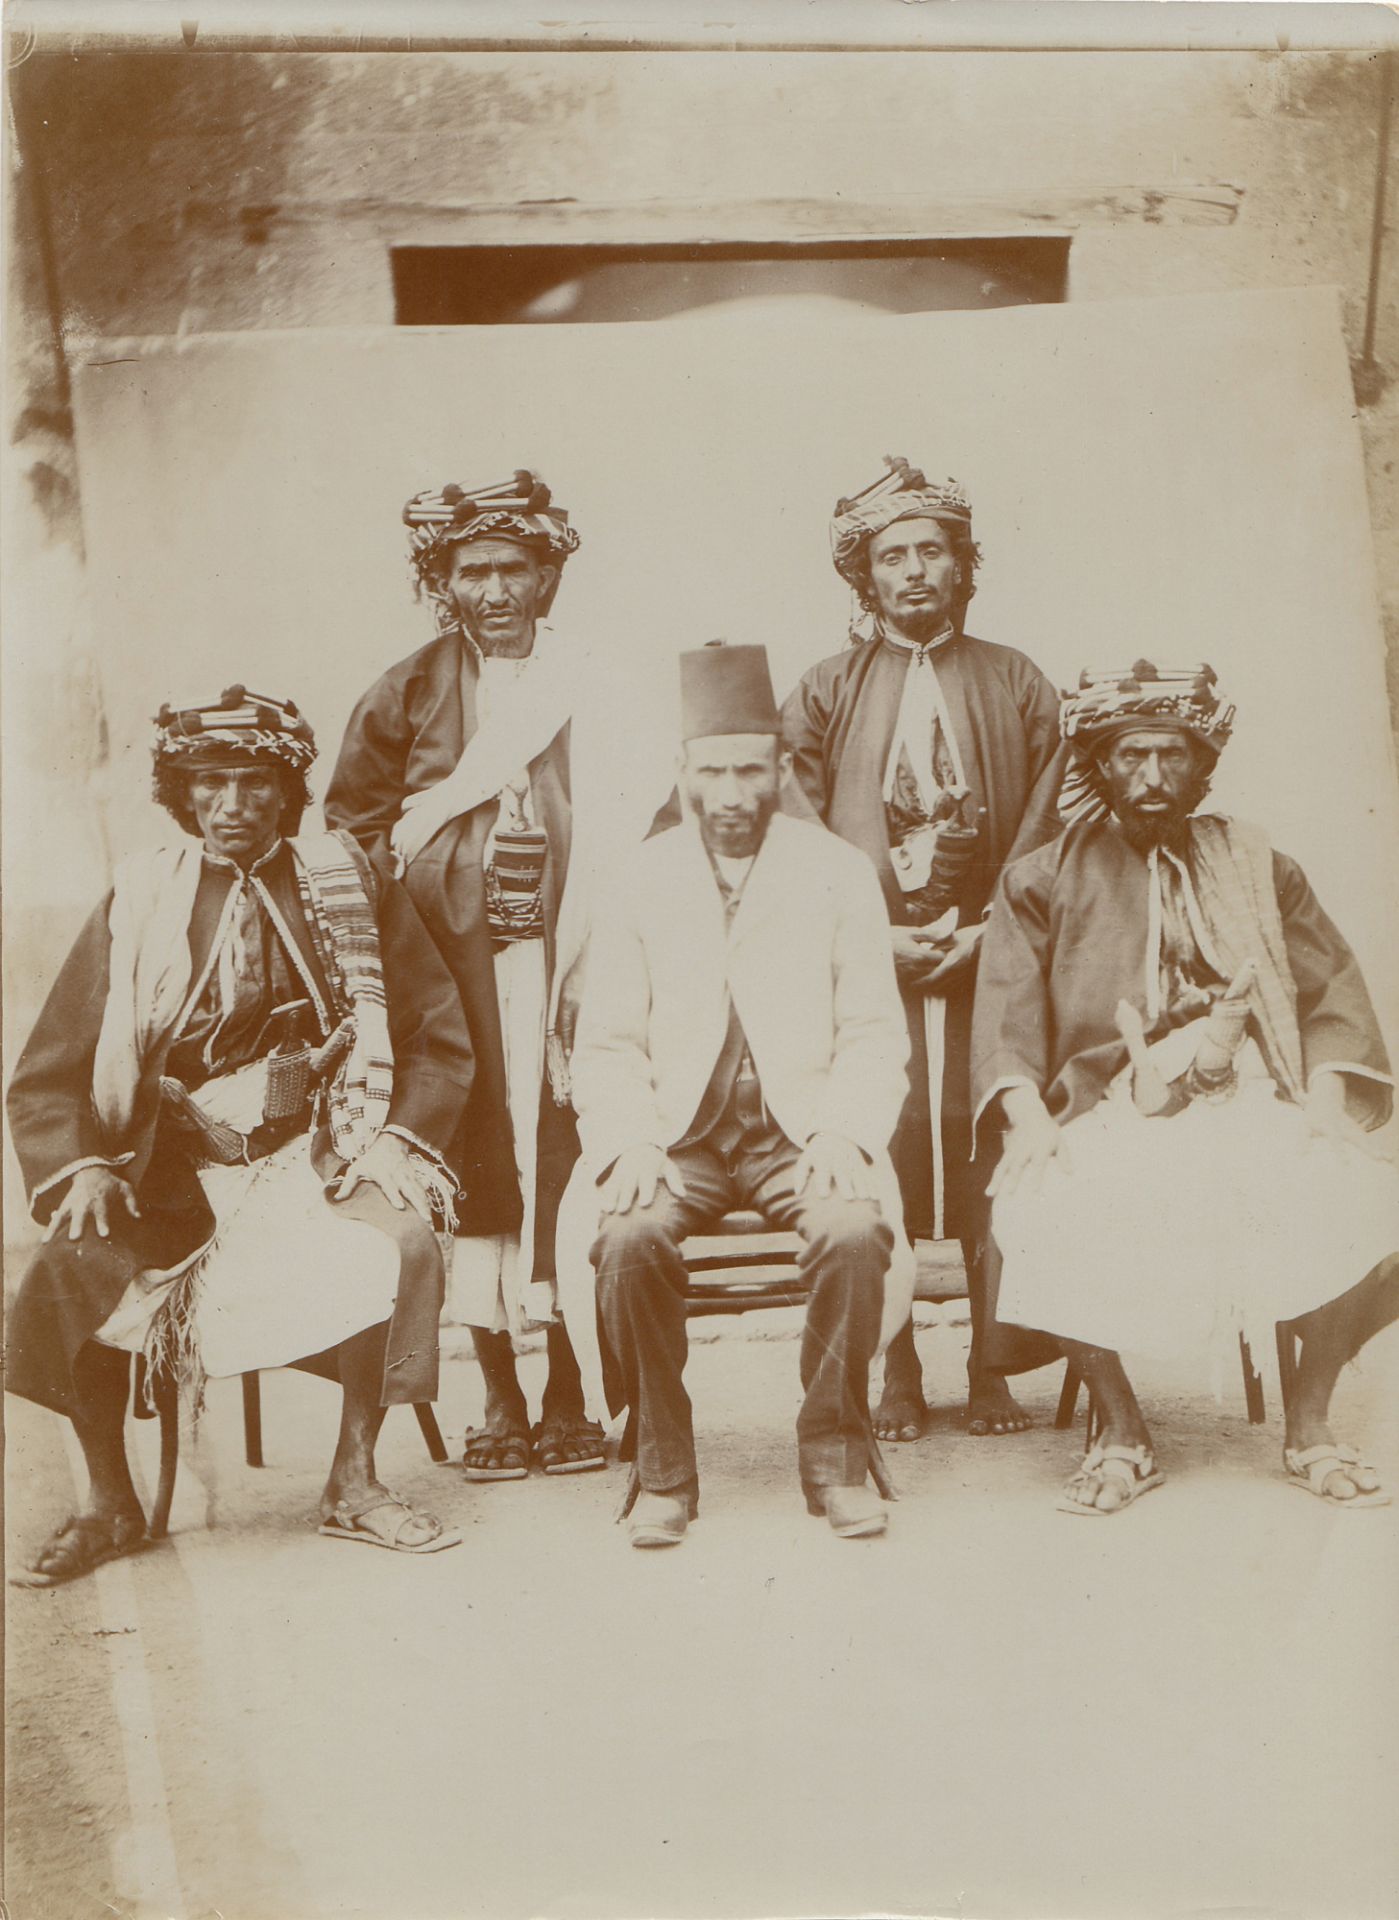 A RARE ARCHIVE ABOUT YEMEN, BELONGED TO AHMED IZZET PASHA - Image 52 of 77